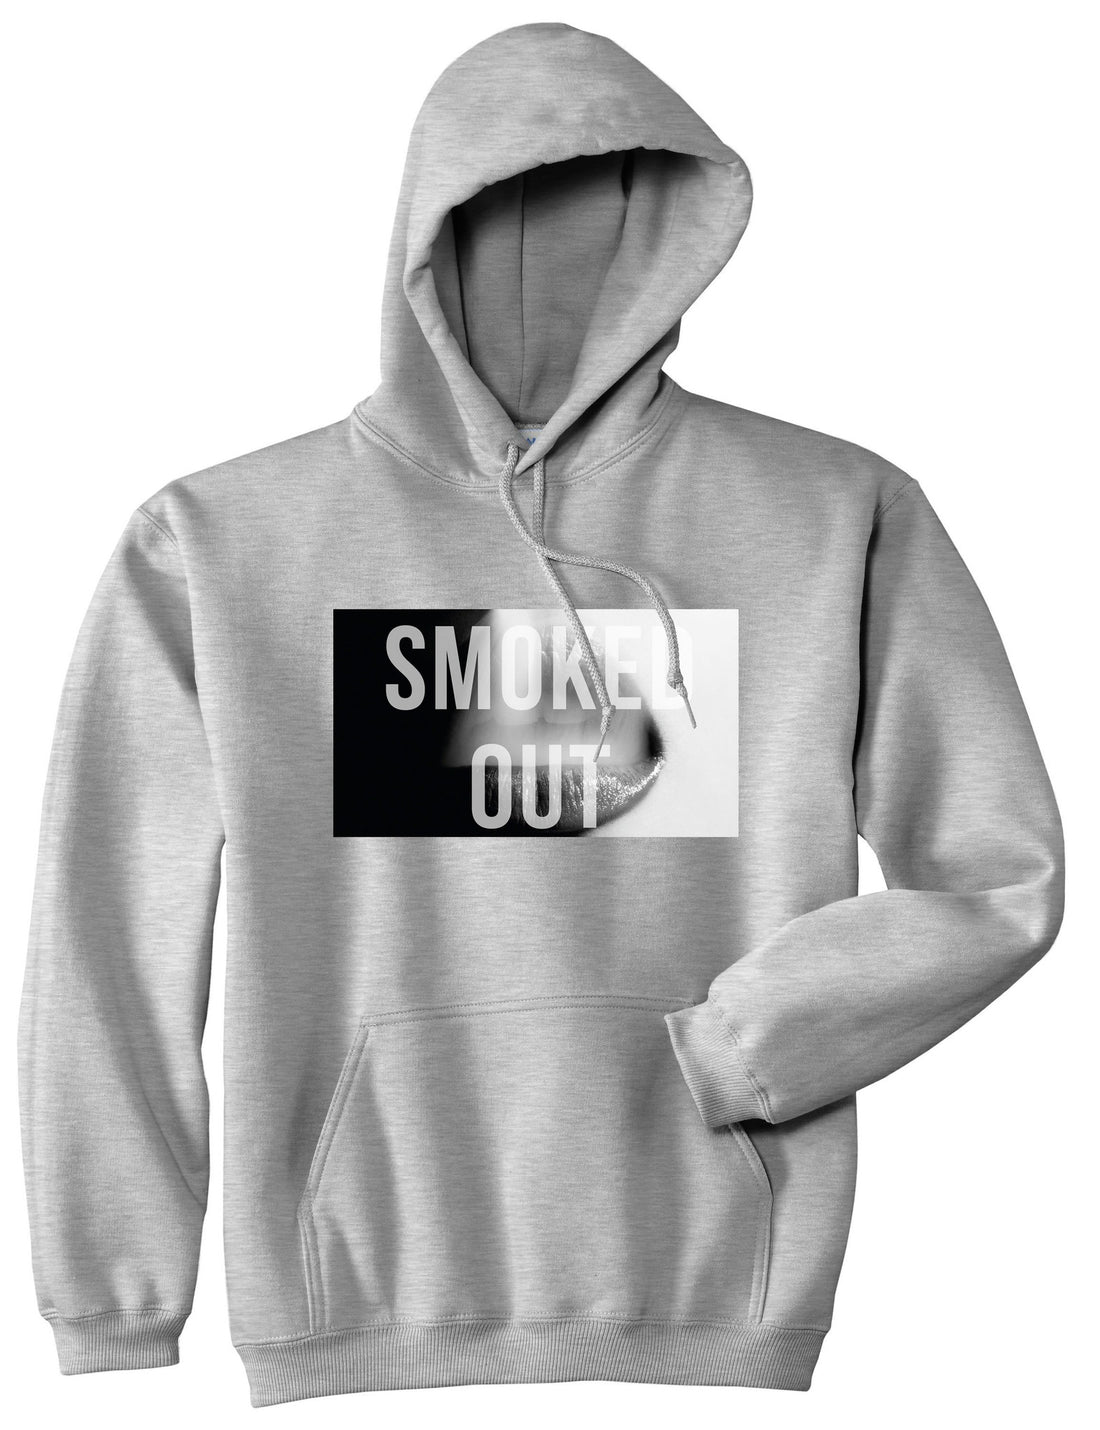 Smoked Out Weed Marijuana Girls Pot New York Pullover Hoodie Hoody In Grey by Kings Of NY